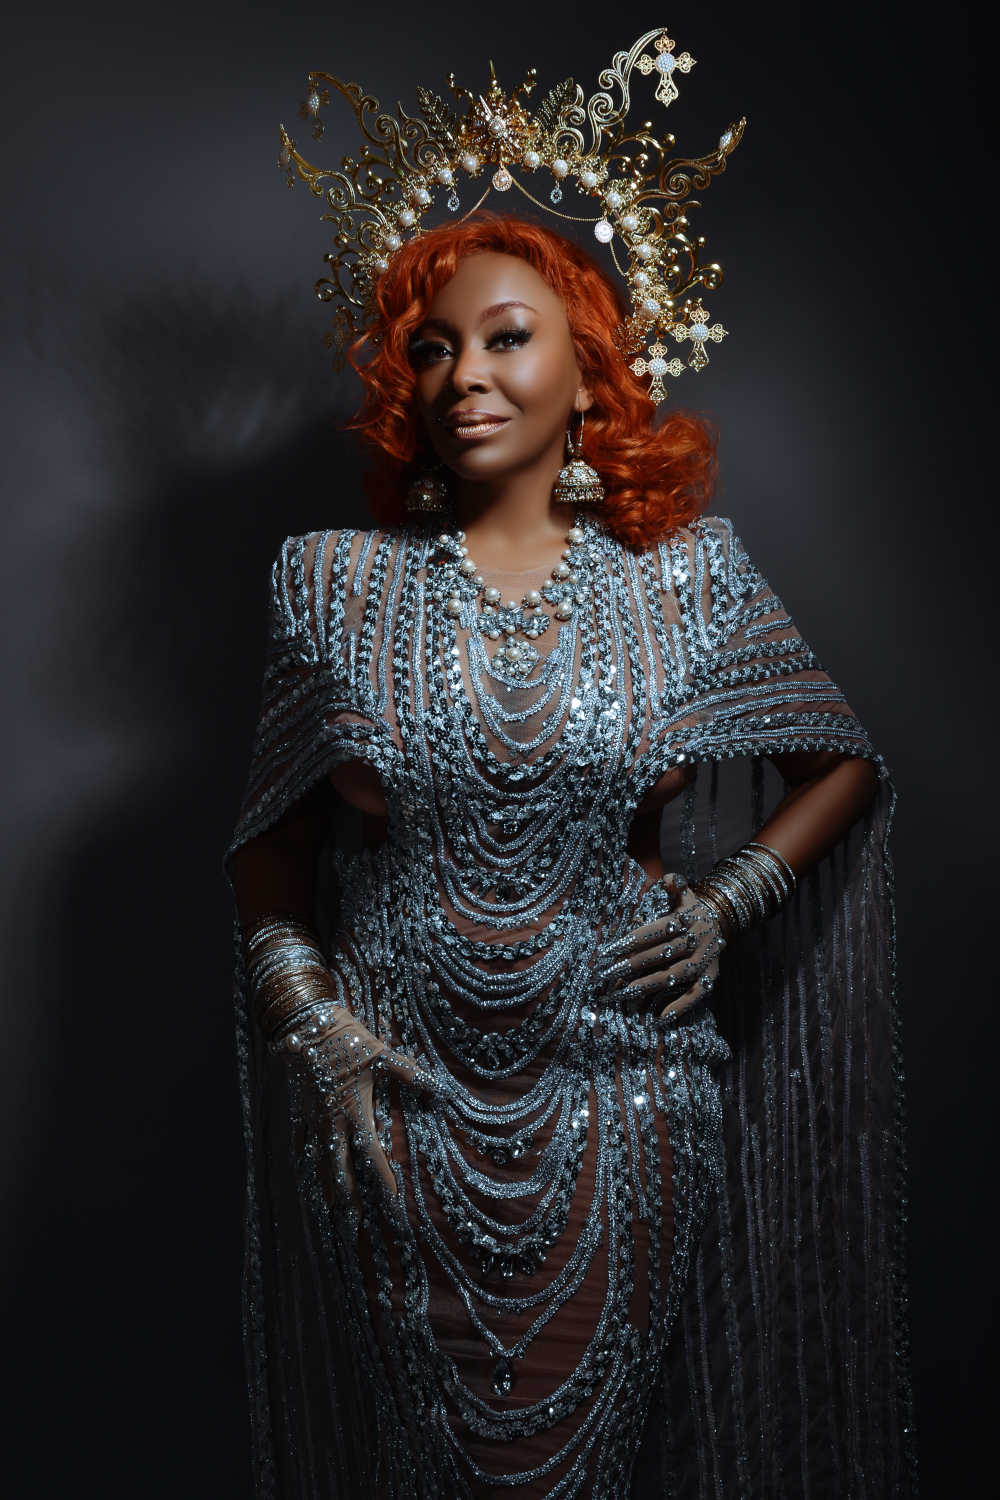 Image of Kele le Roc in a sparkling dress, gloves and golden headdress